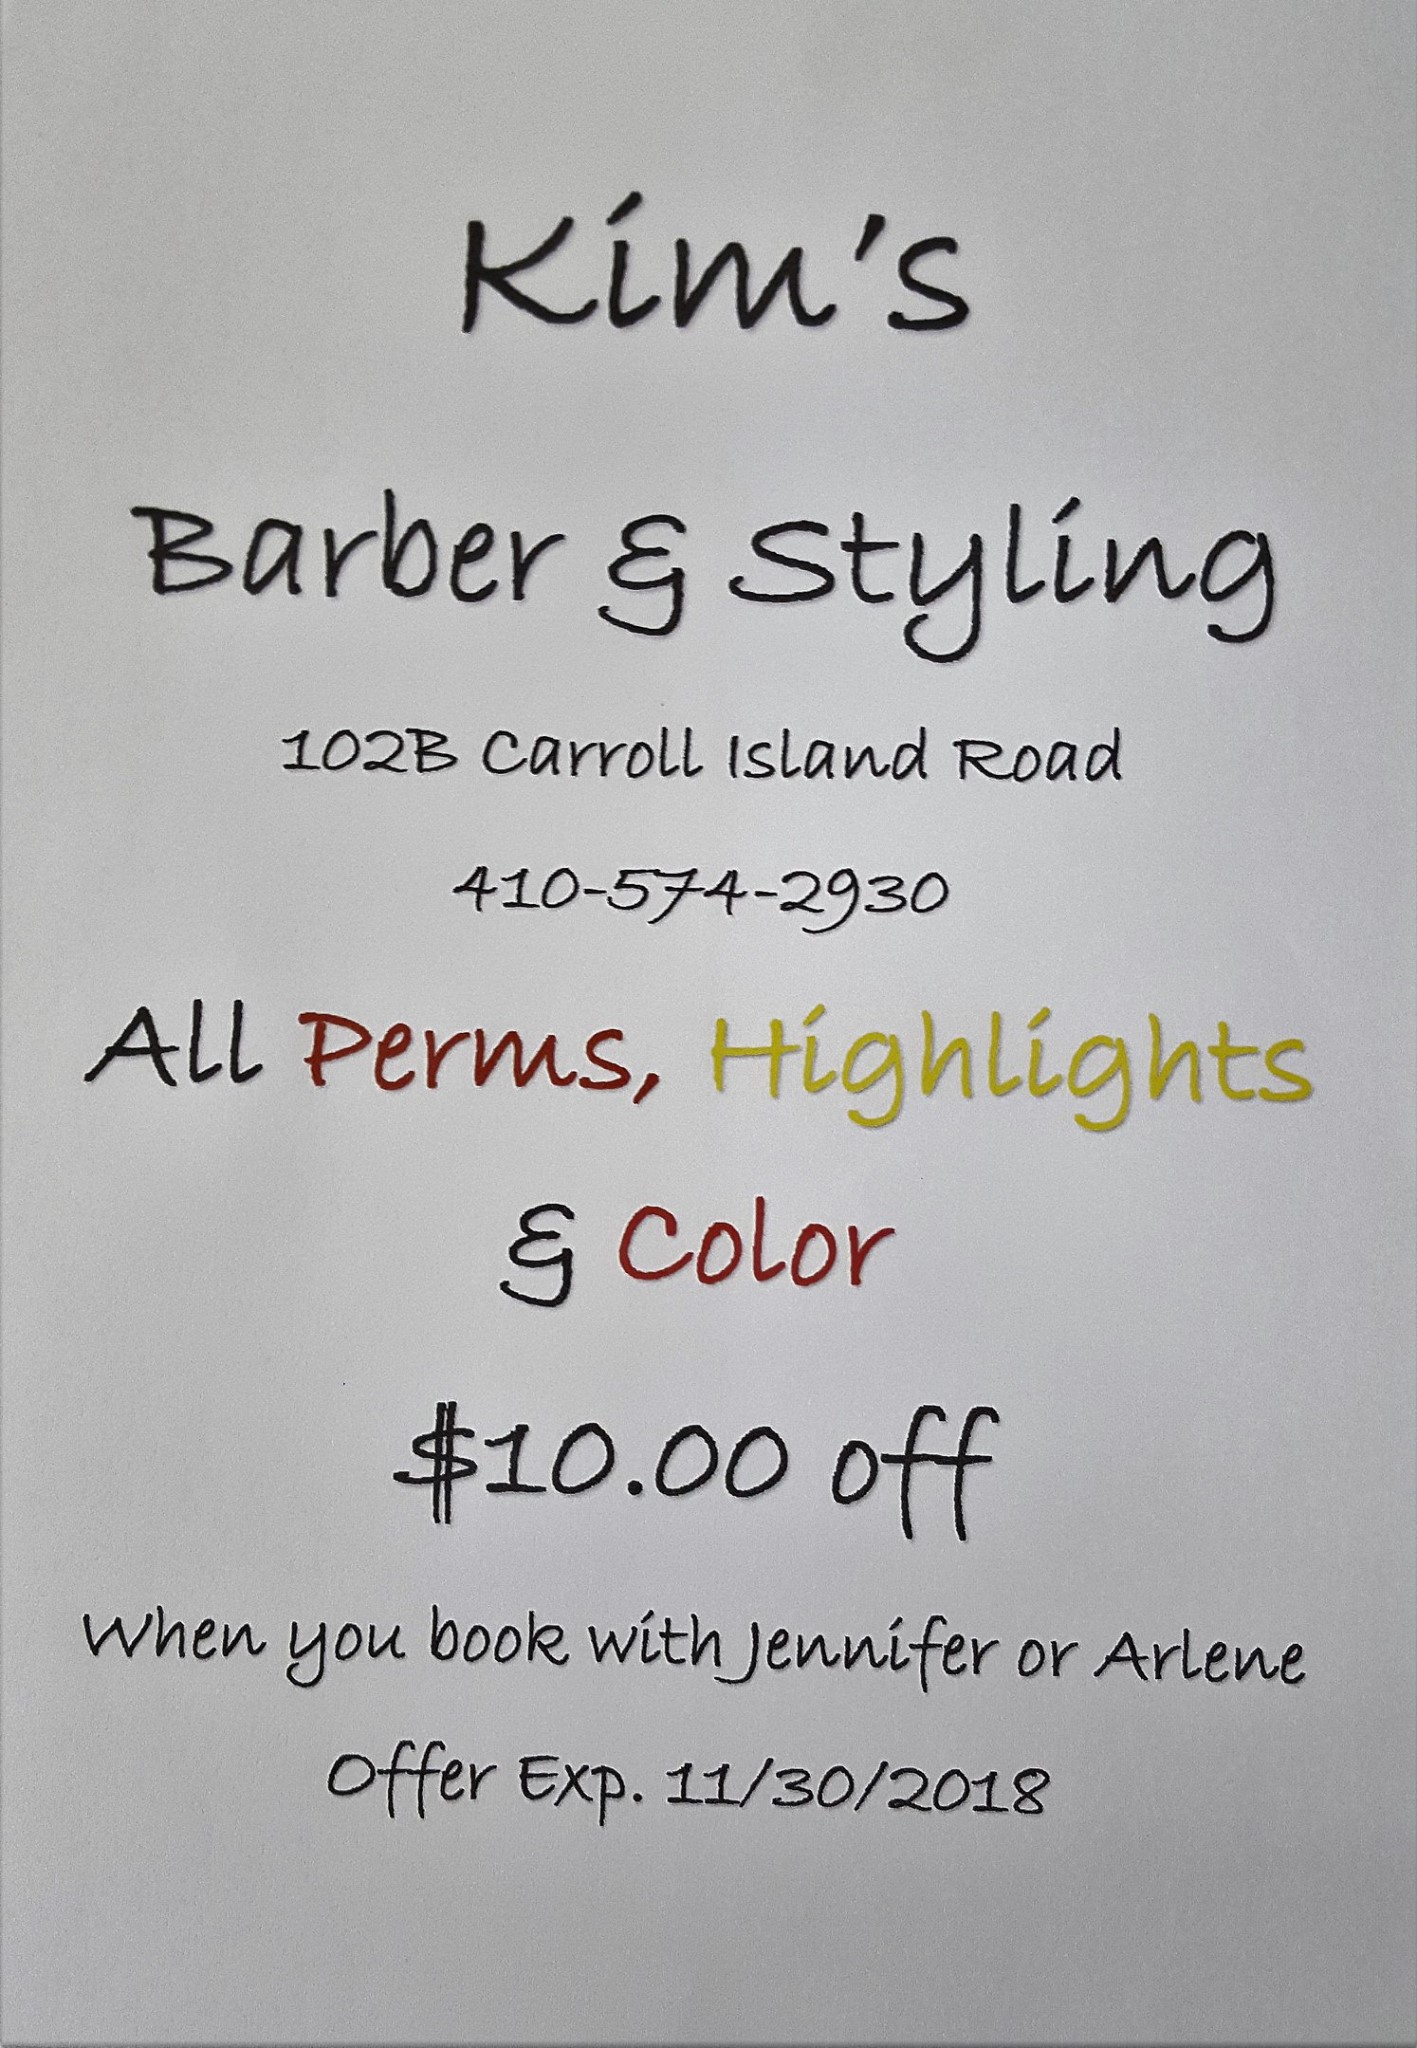 Kims barber and styling 102 Carroll Island Rd, Middle River Maryland 21220